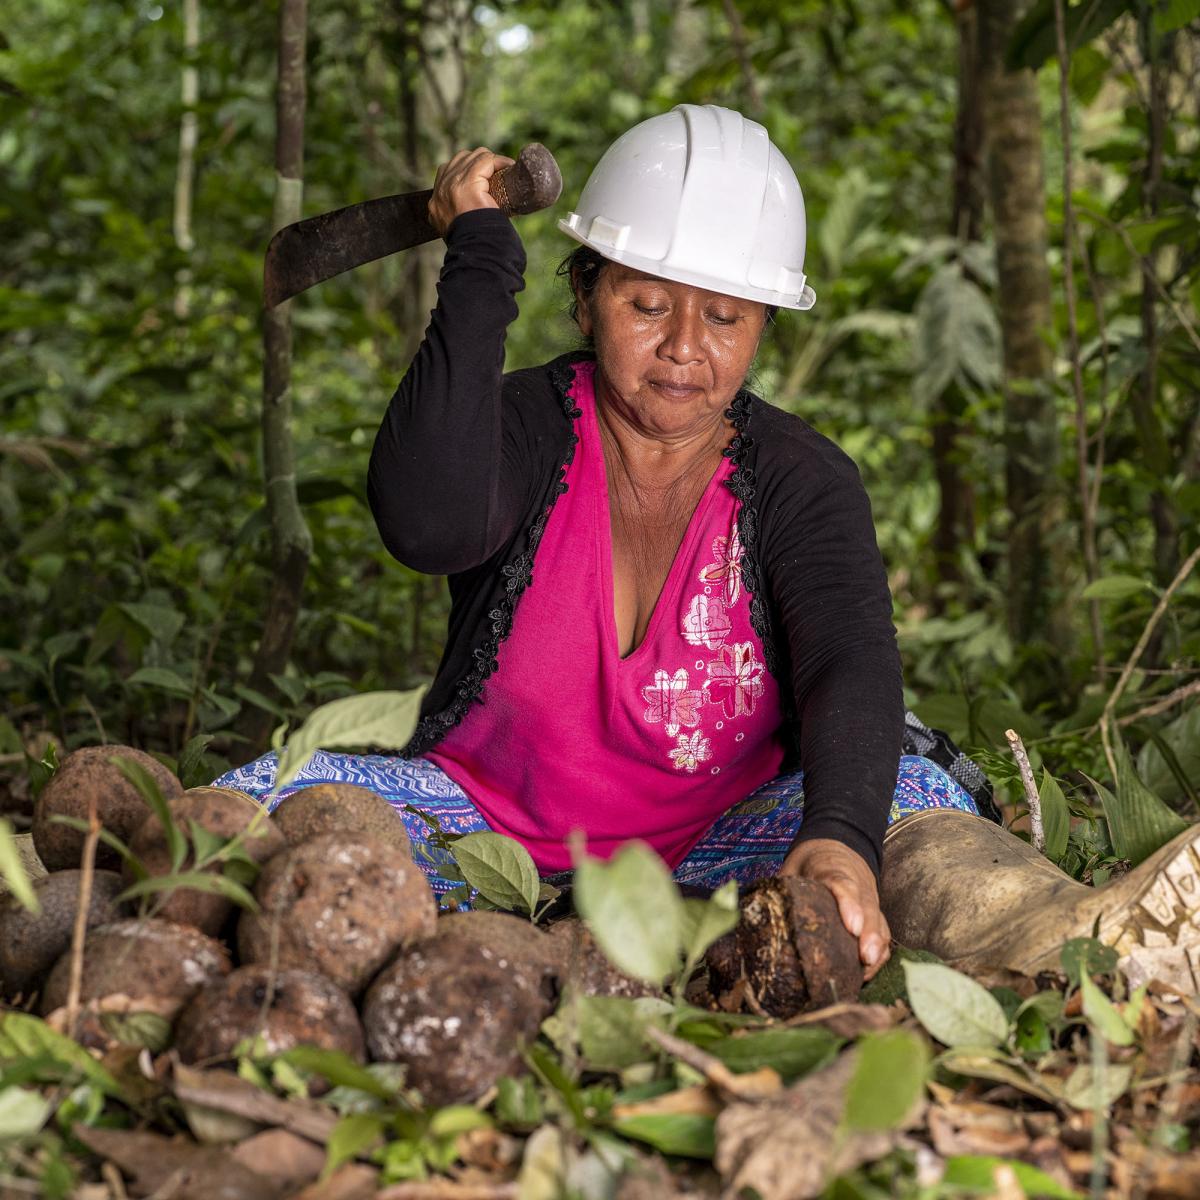 A woman in the rainforest siting on the ground cutting a Brazil nut